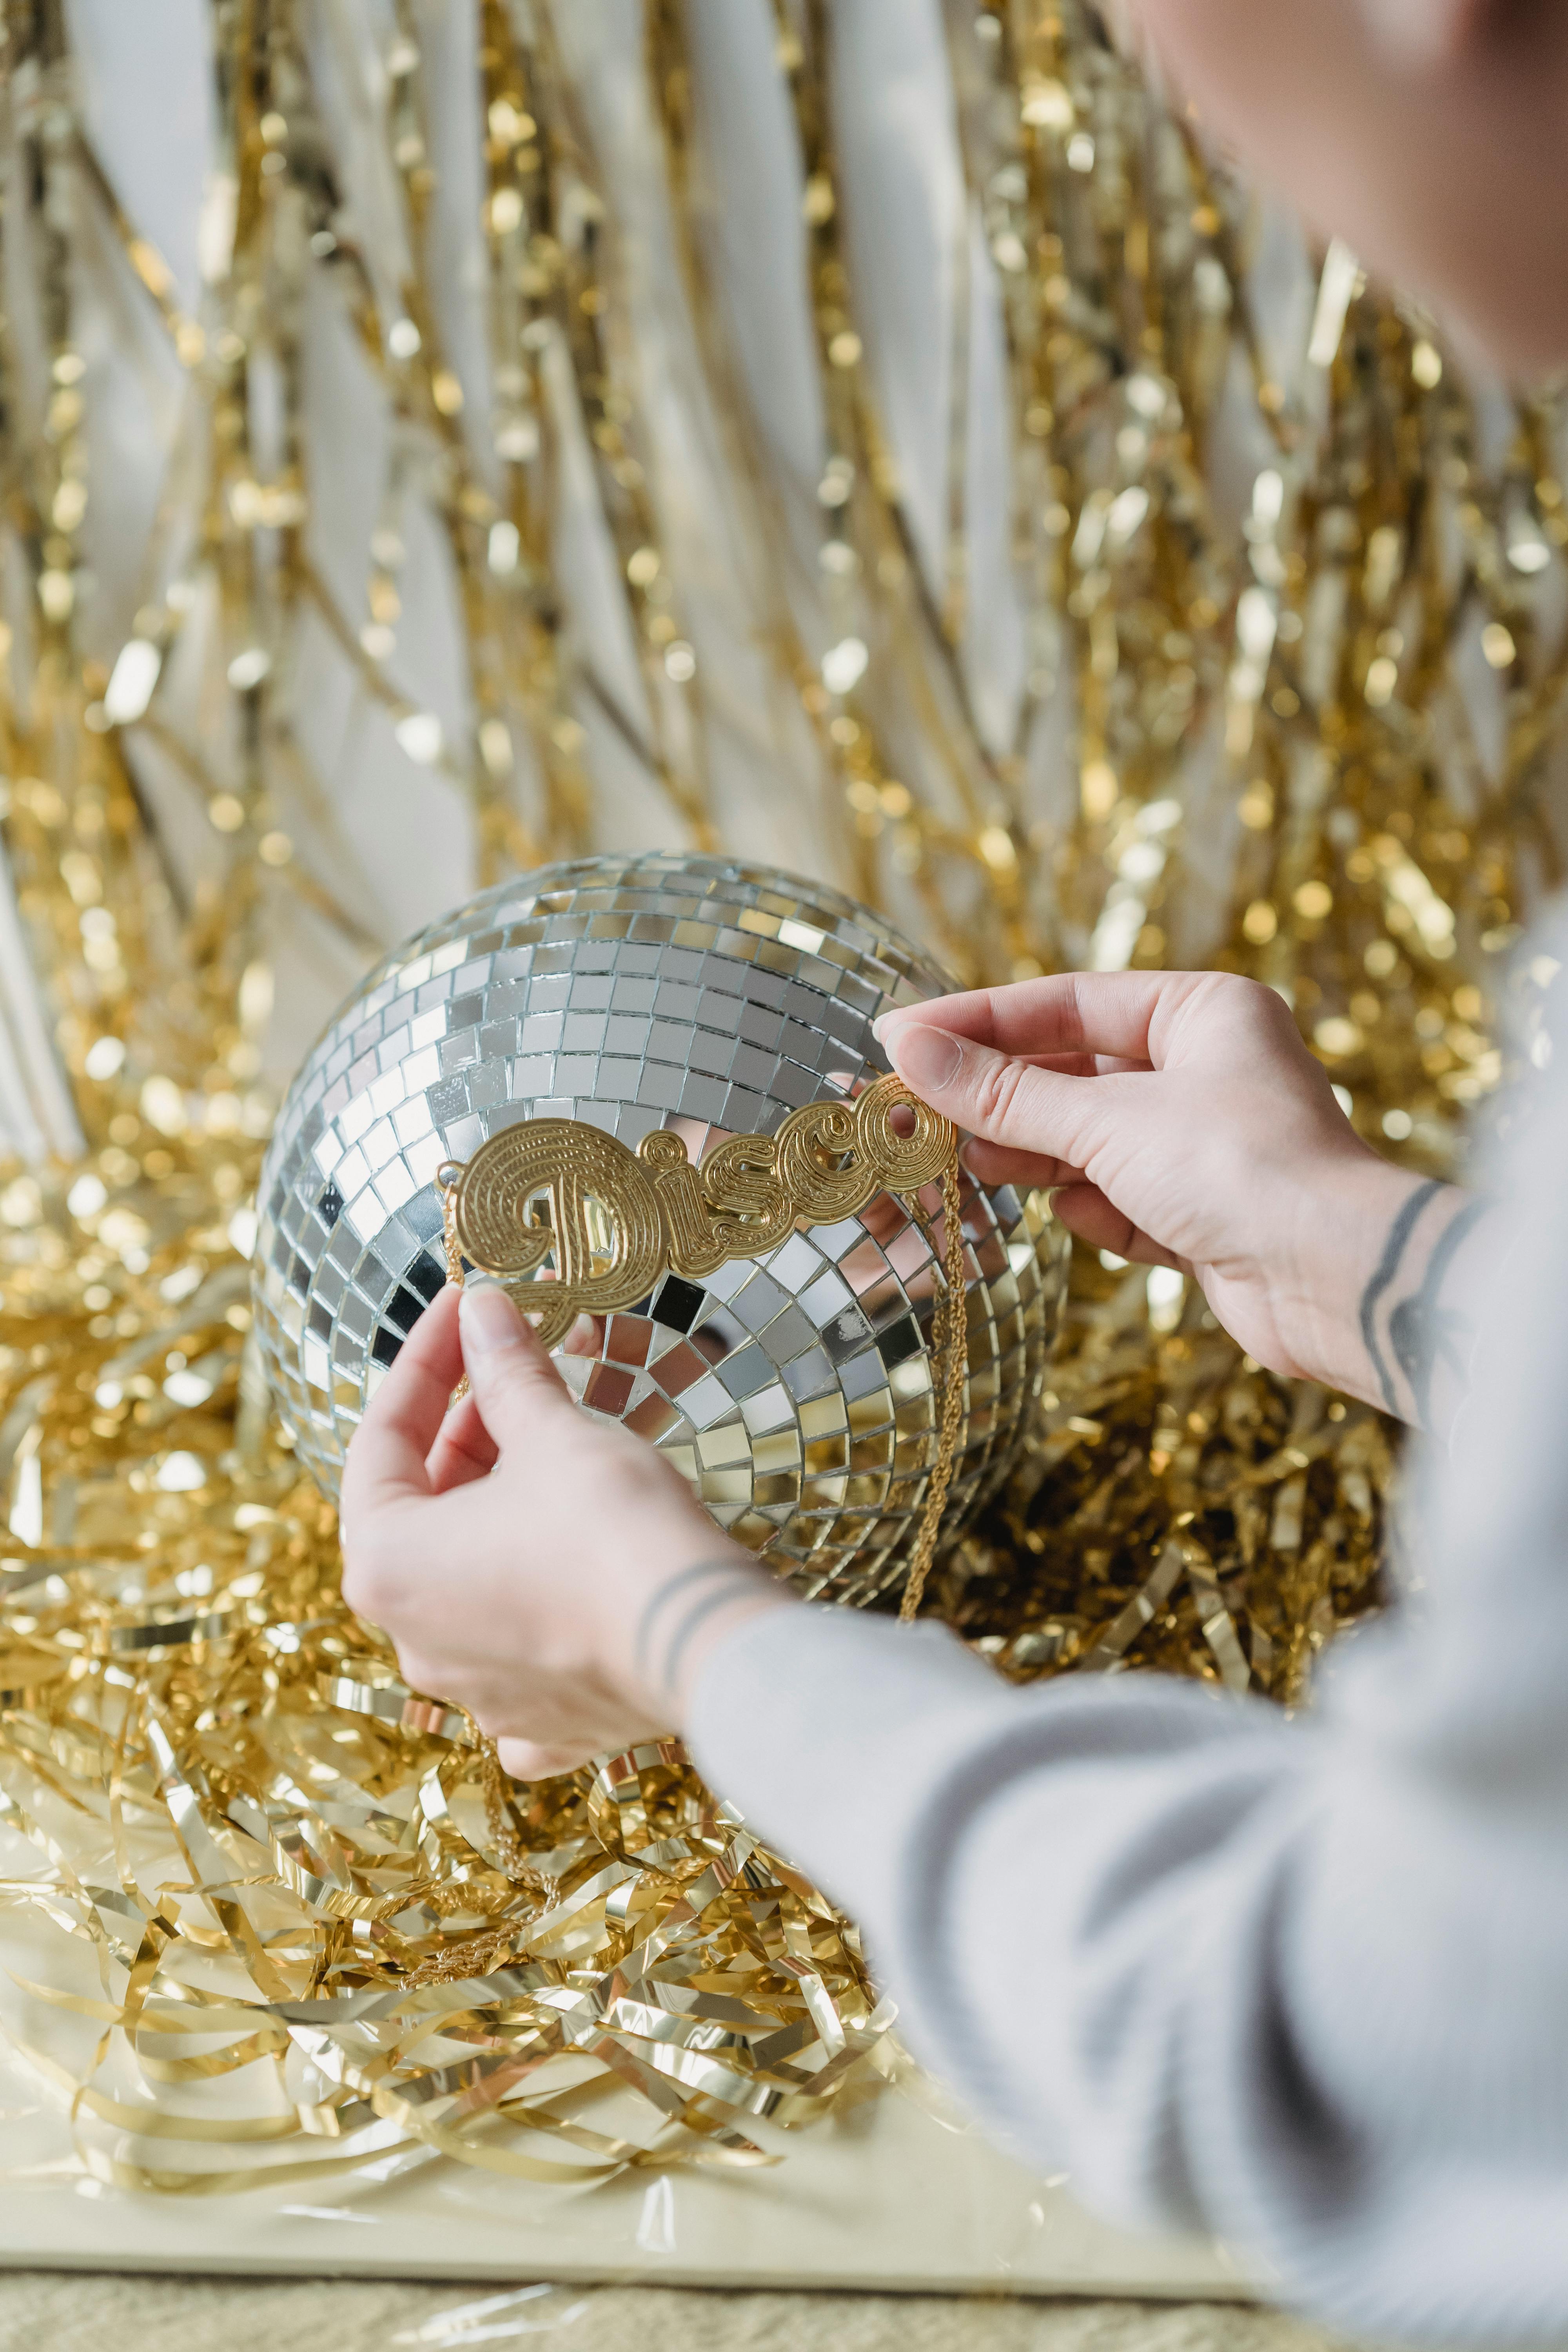 crop faceless person decorative disco ball against golden tinsels